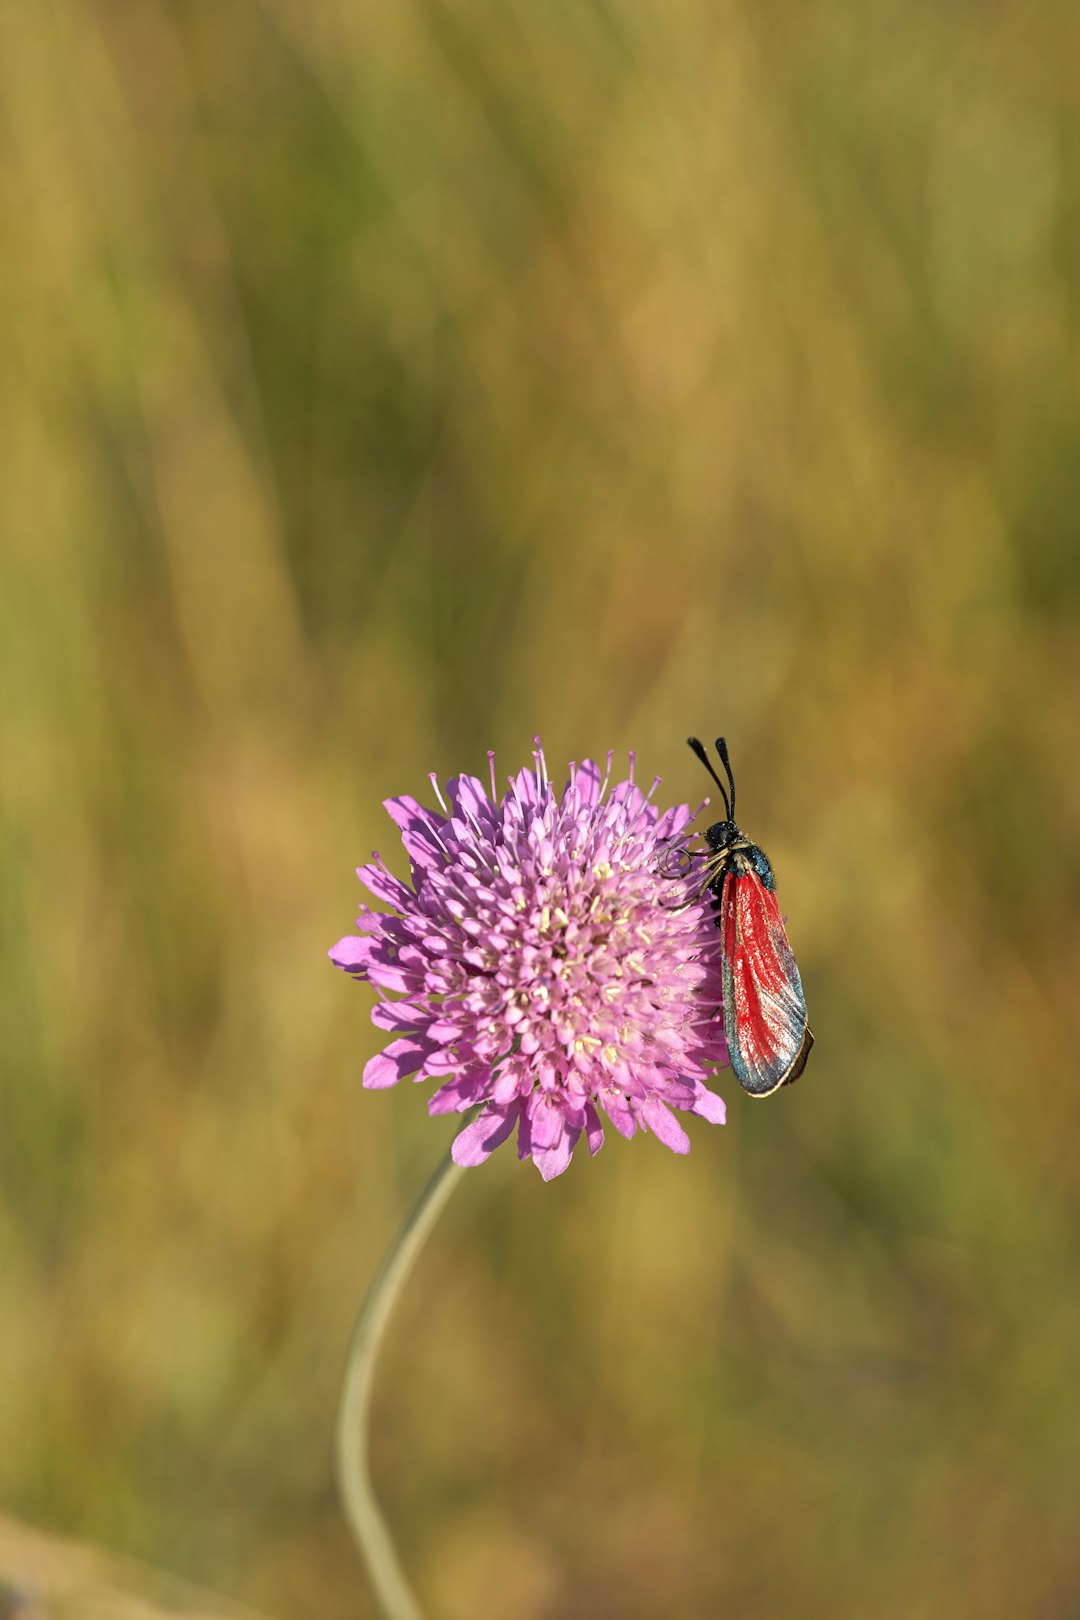 black and red butterfly perched on purple flower in close up photography during daytime